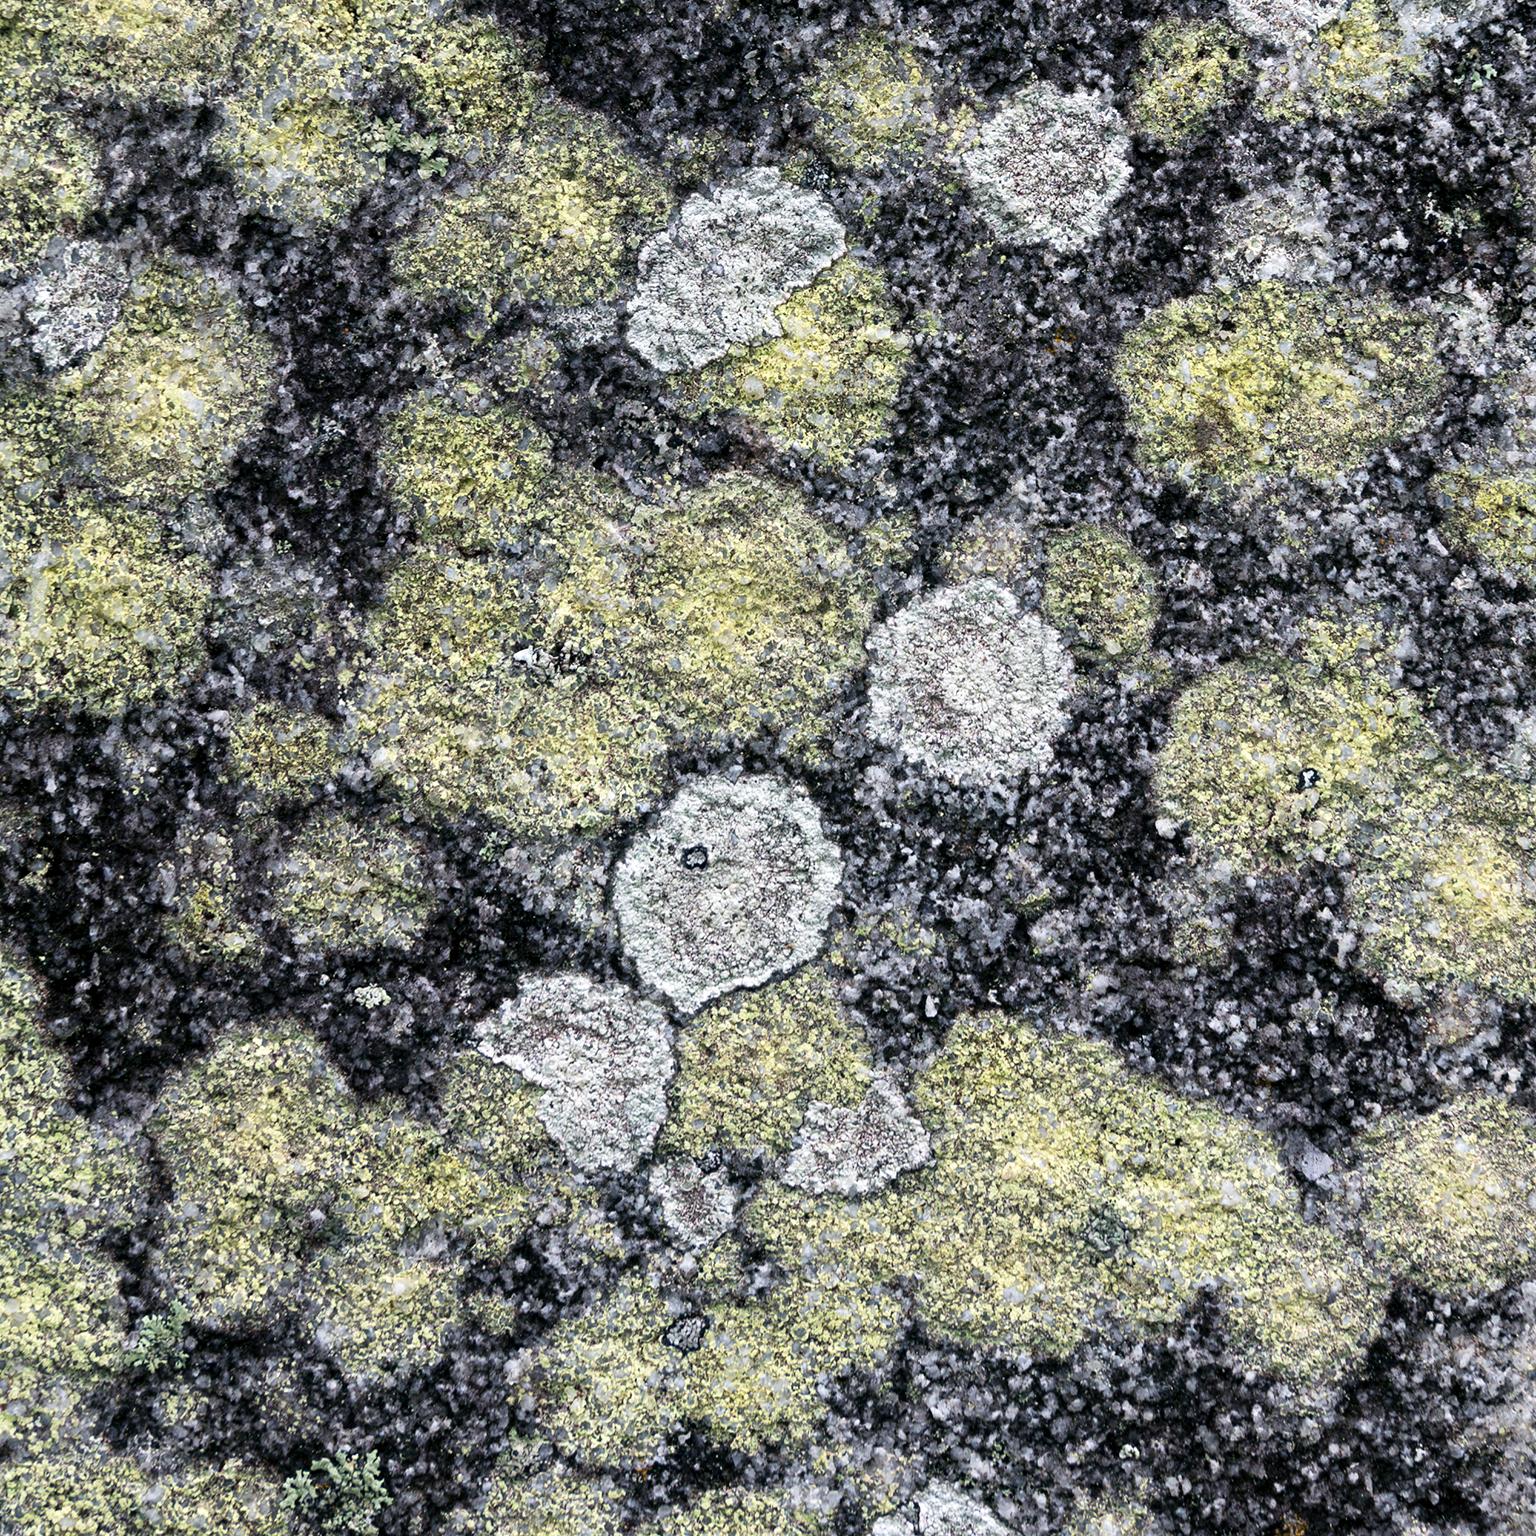 Abstract in Nature, Australia, 2018
Photograph by Cosmo Condina. Lichen growing on a rock, Maclean, Australia, 2018
Archival pigment print 19 X 12.6 in. Edition of 10. This is # 3/10 in the edition.

A colour photograph of lichen creating an